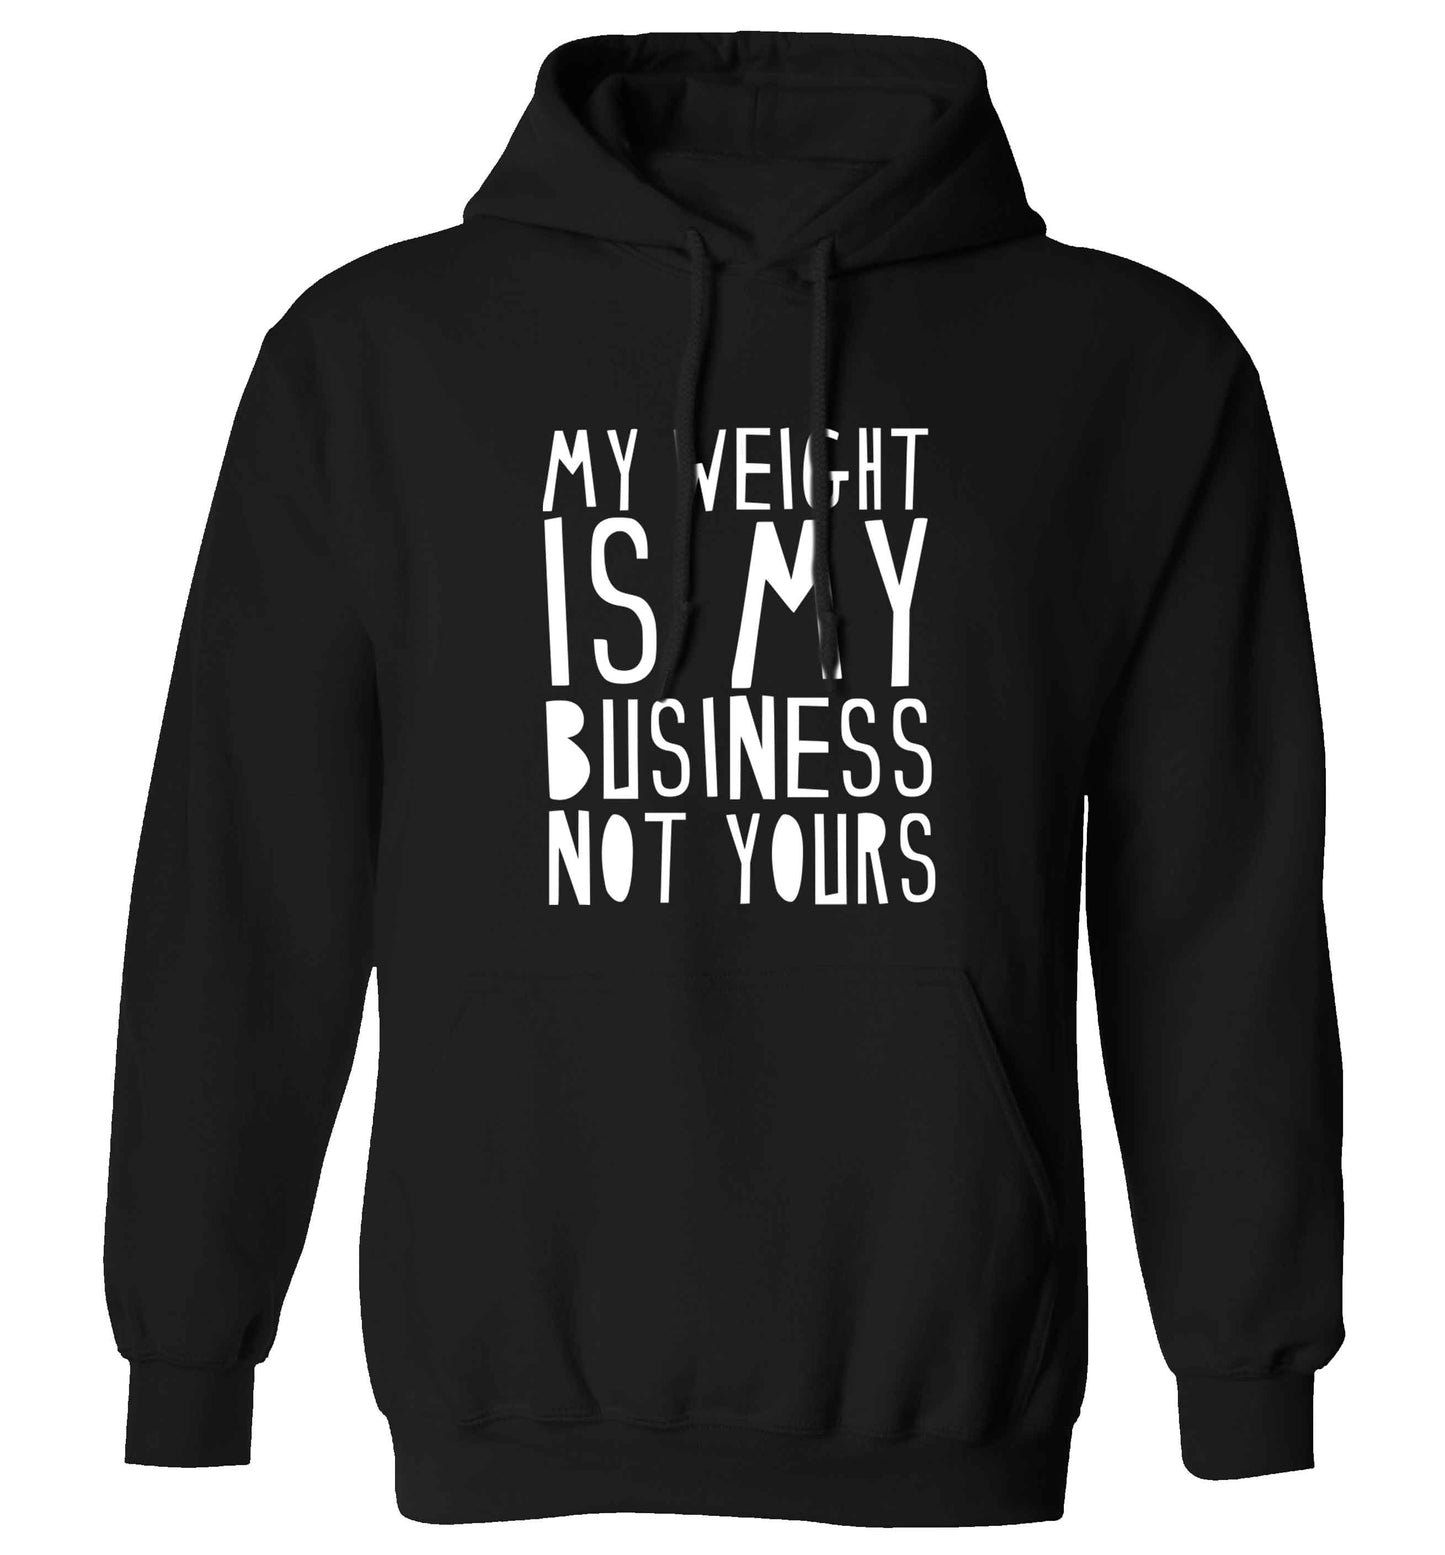 My weight is my business not yours adults unisex black hoodie 2XL